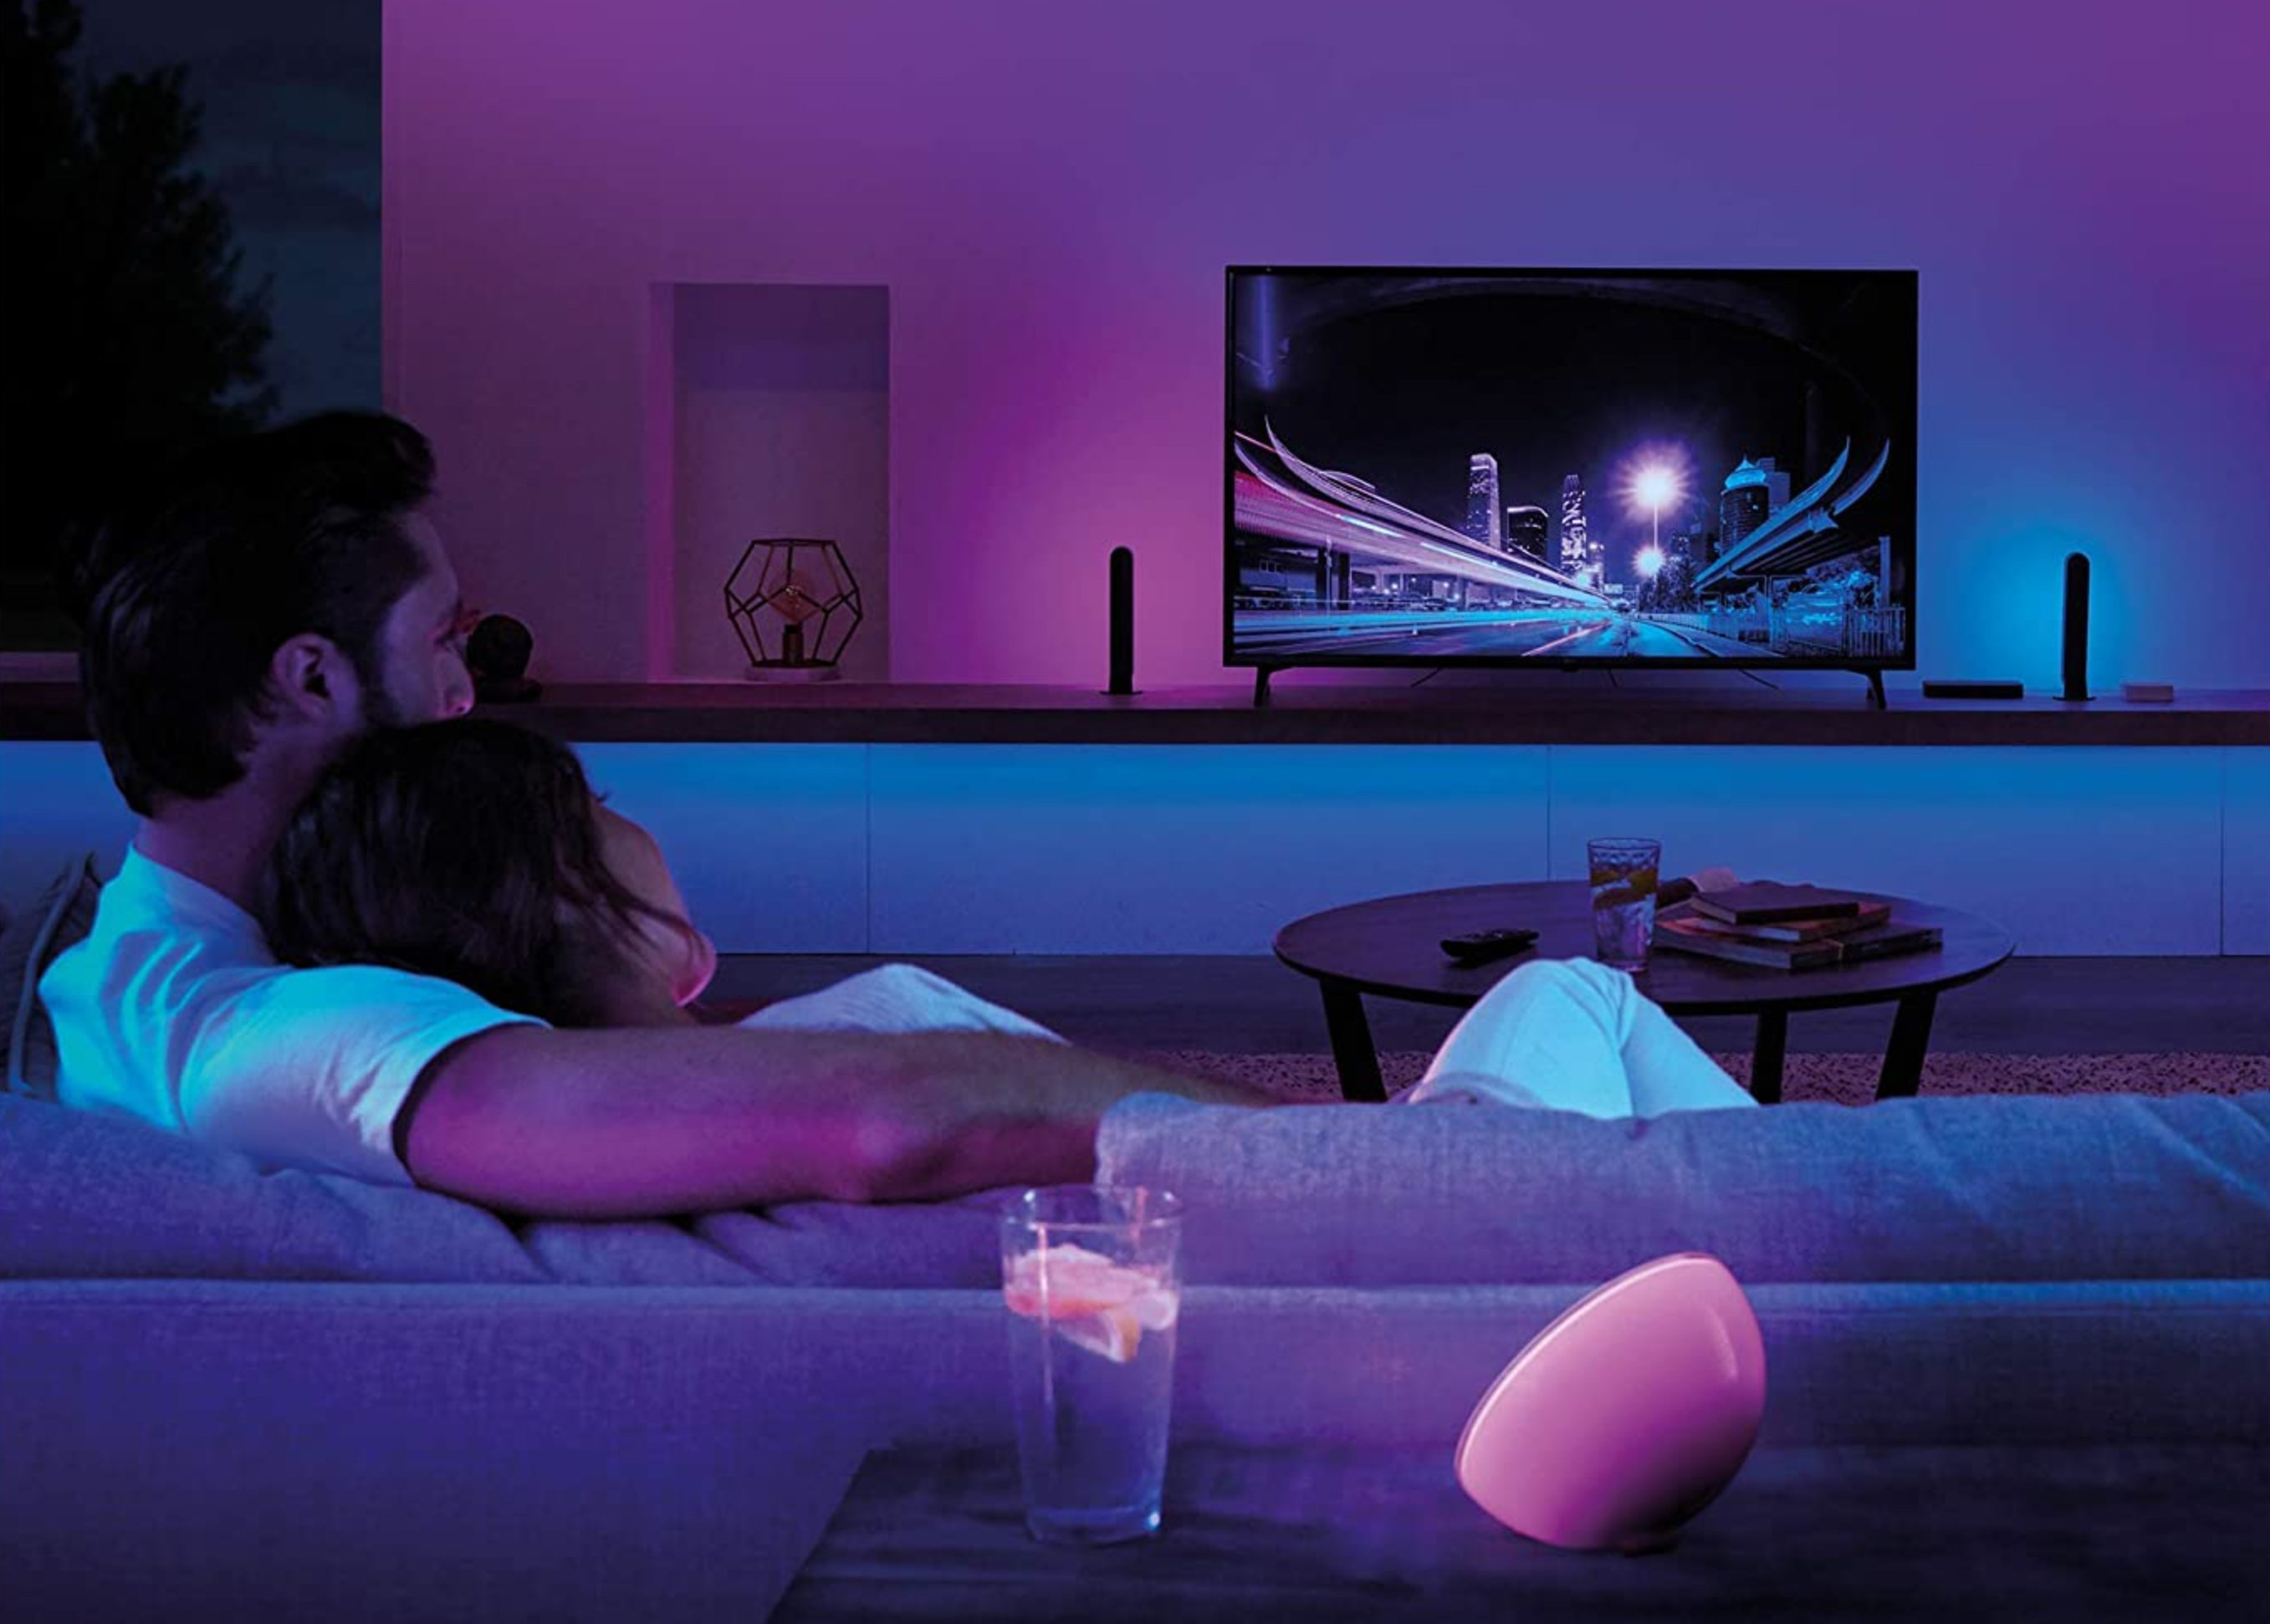 Is Philips Hue the Best Choice for a DIY Smart Lighting System